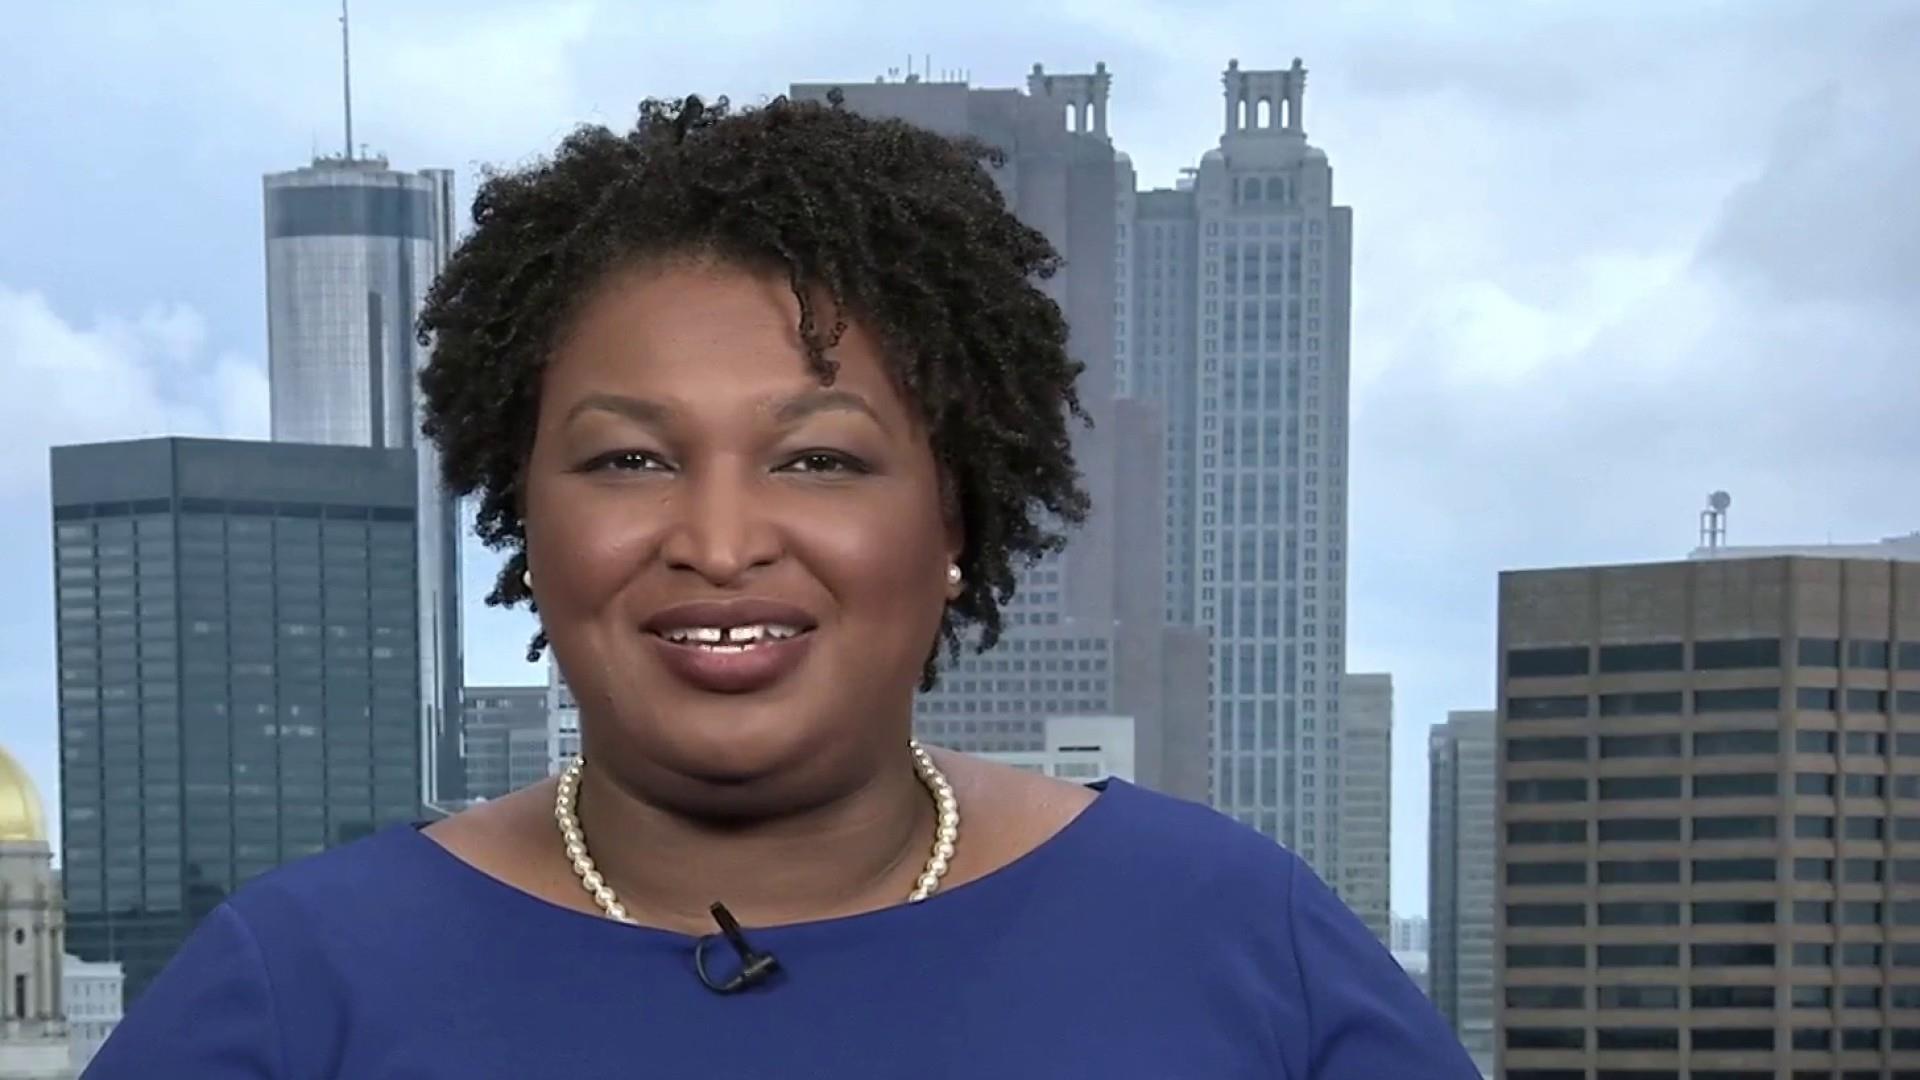 Stacey Abrams talks about her historic primary win